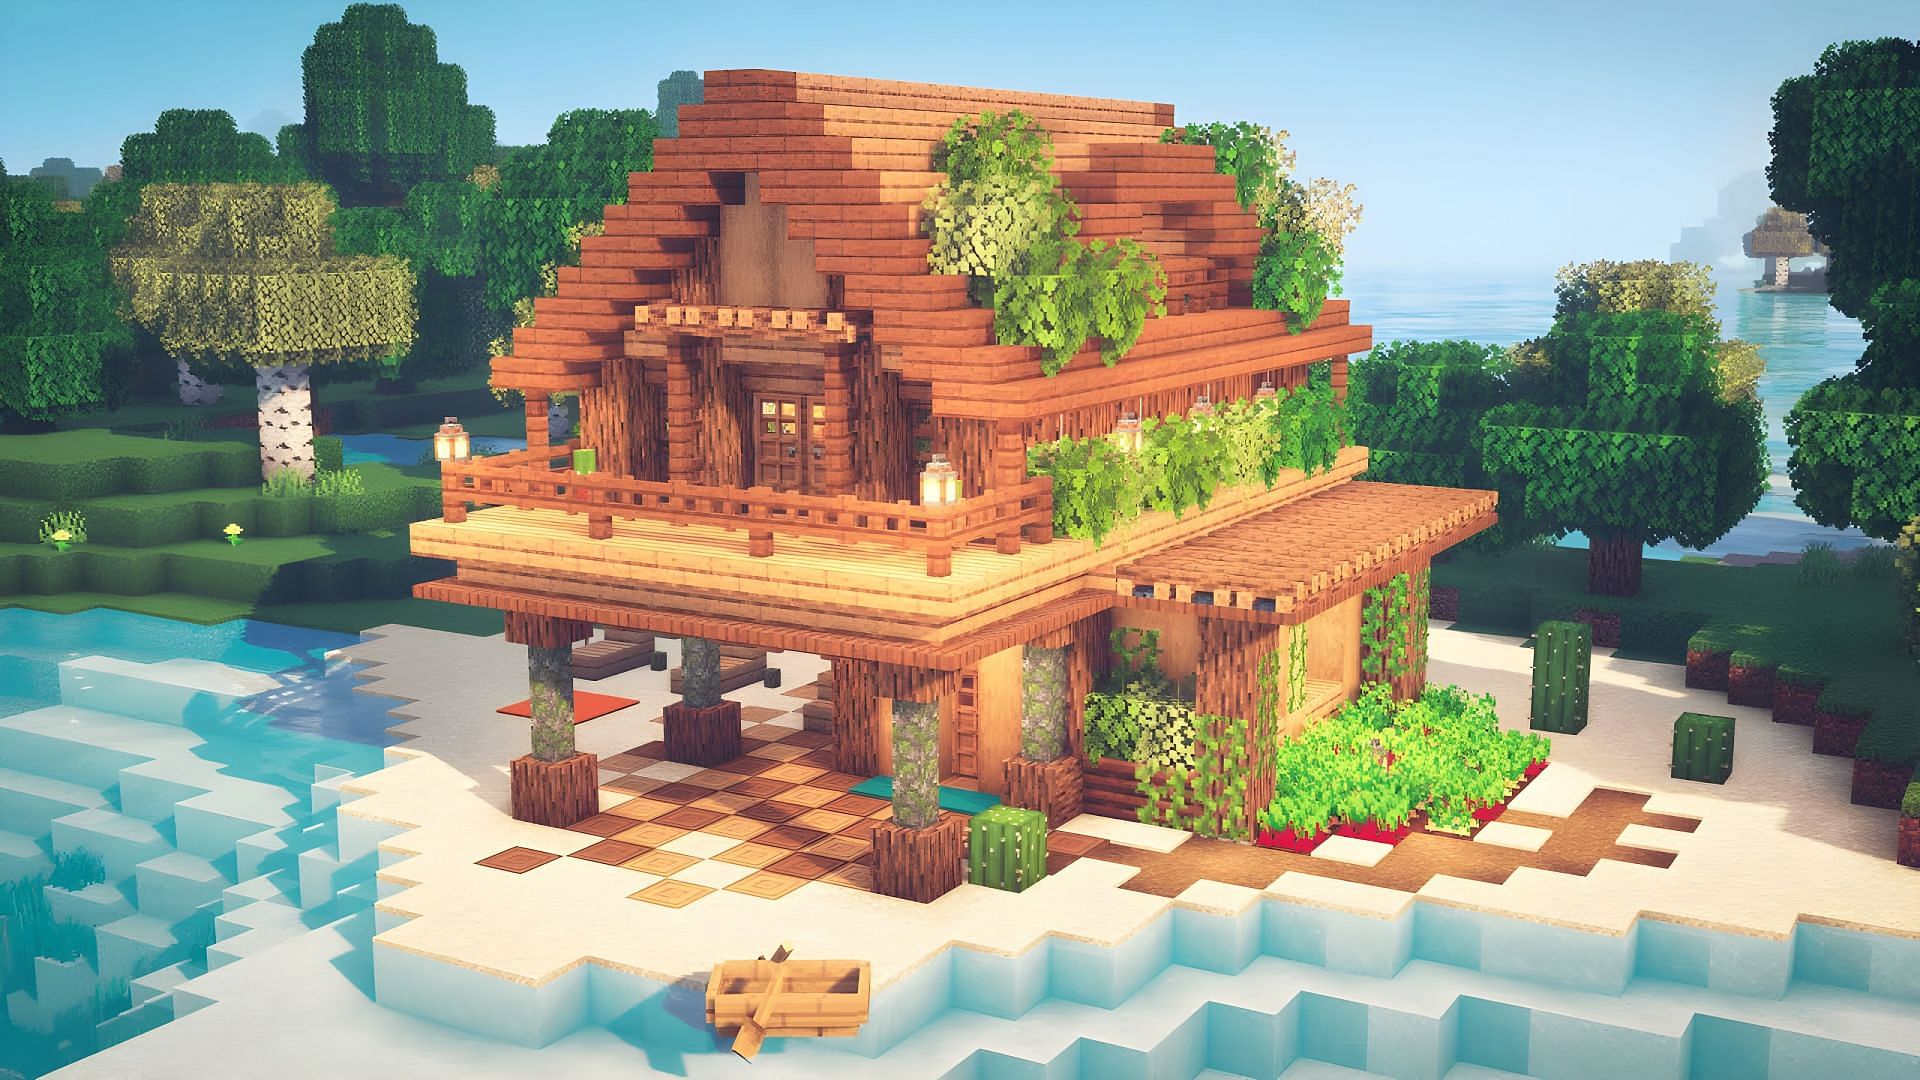 my minecraft house by ThePixelCreator on DeviantArt